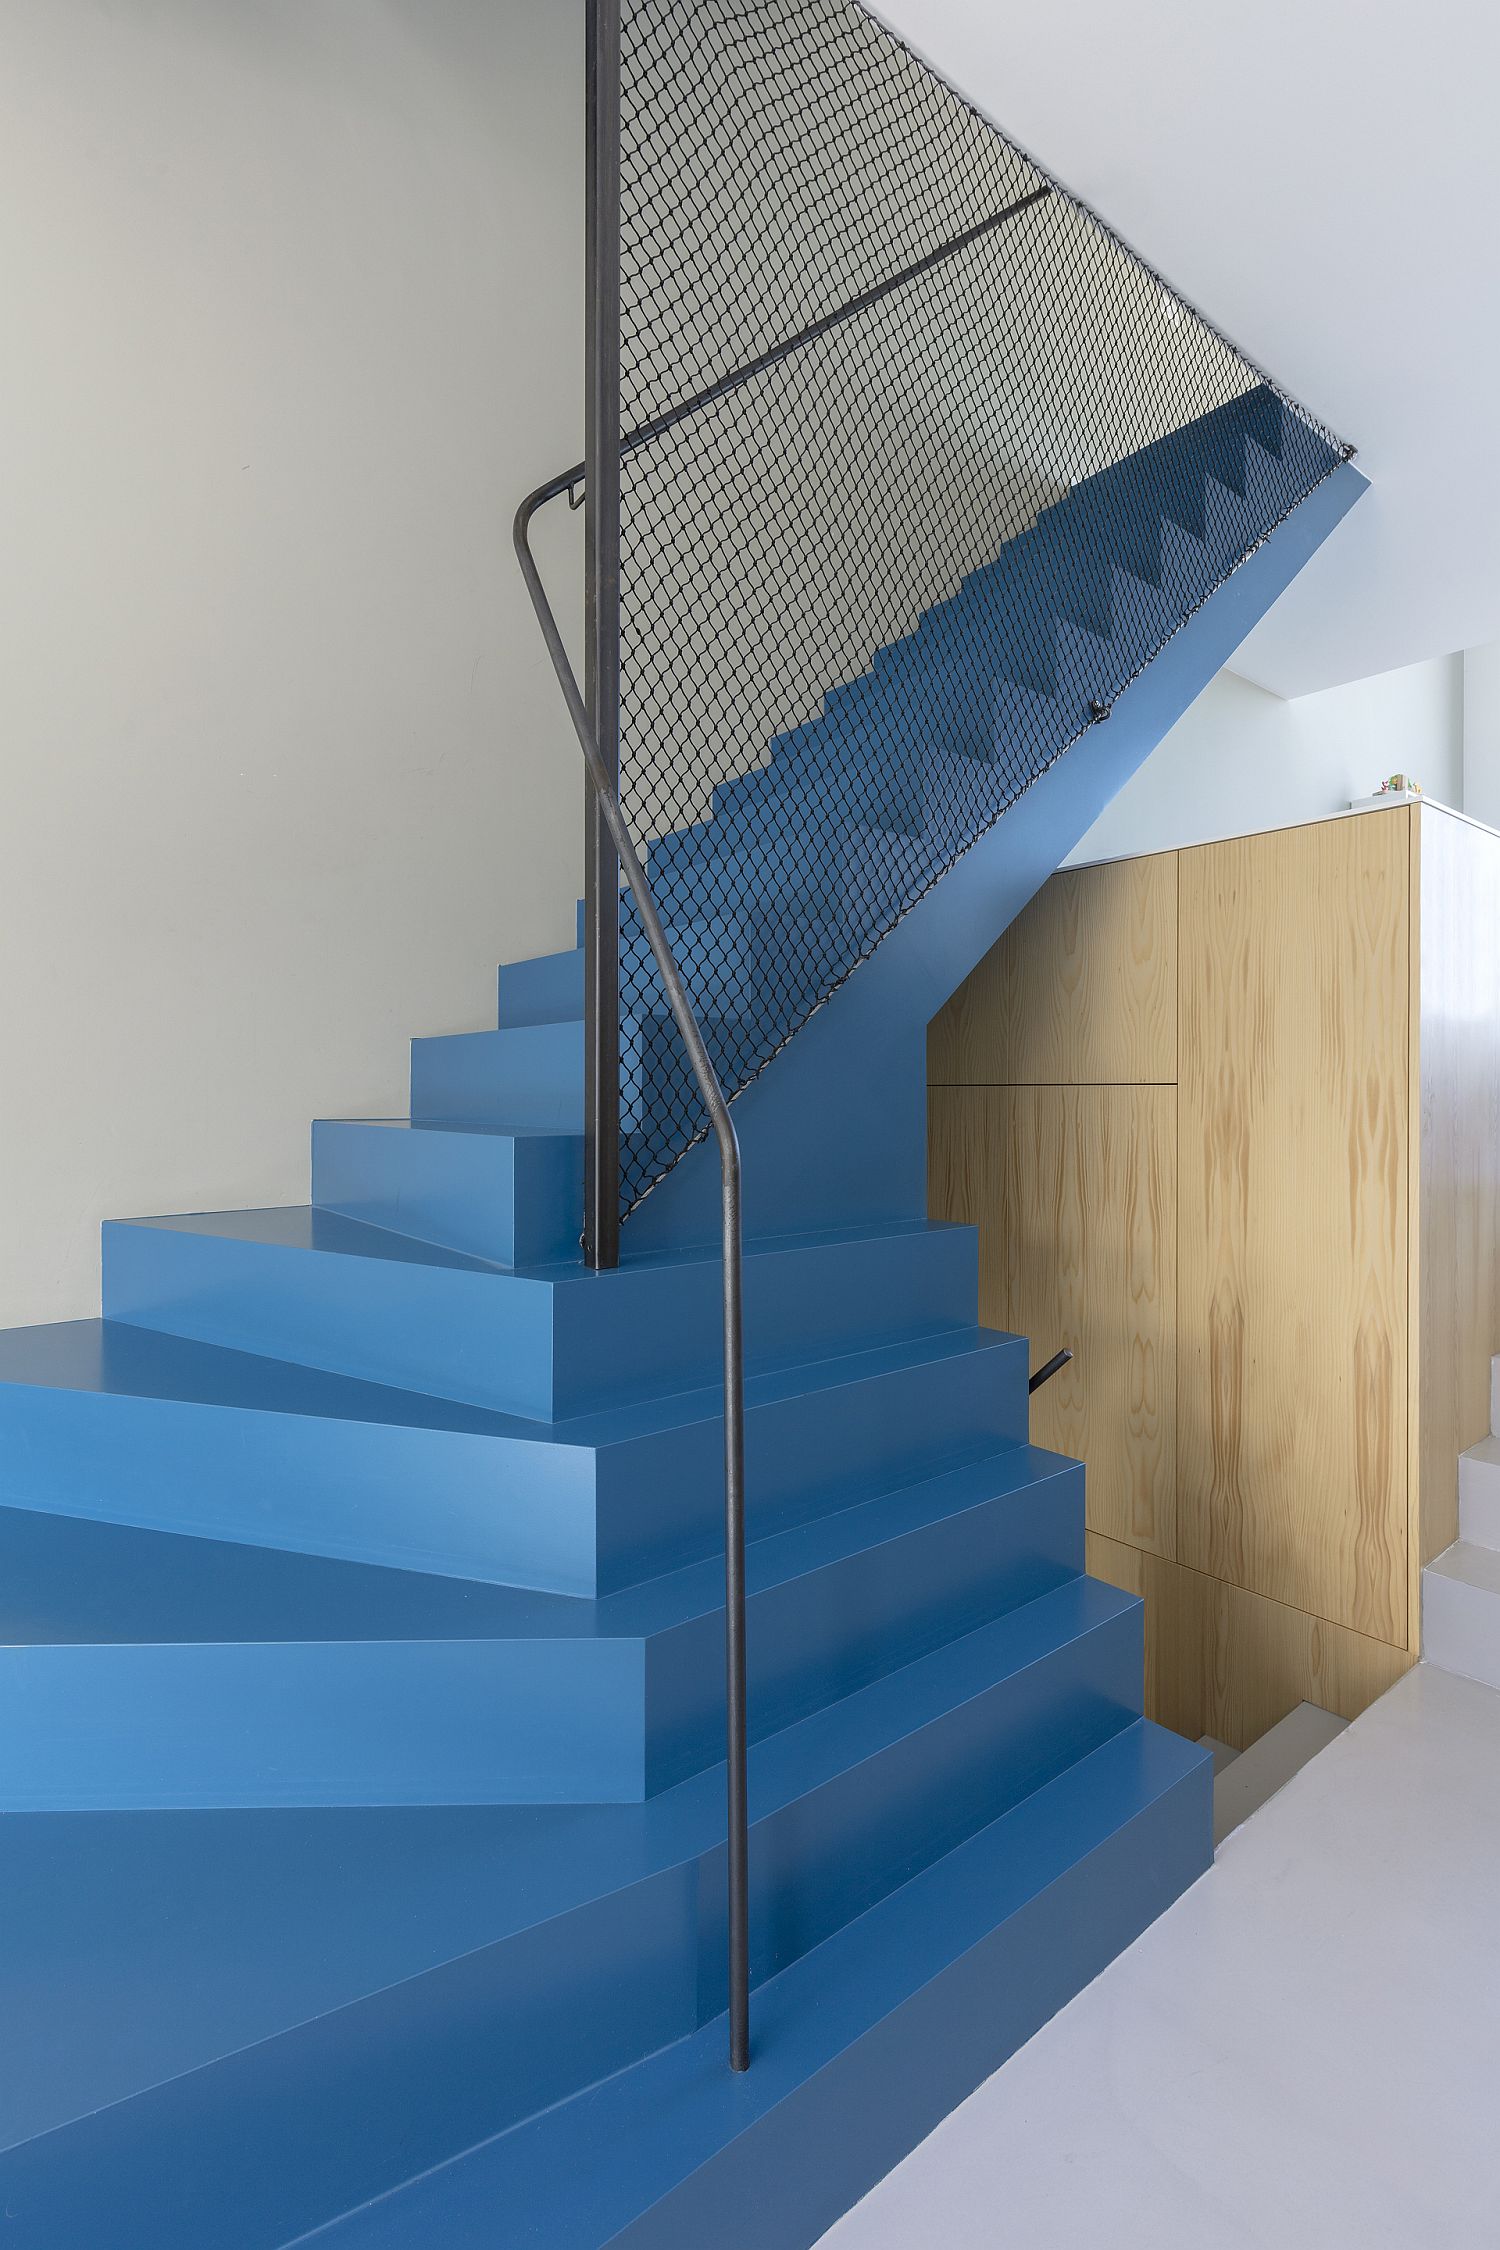 Striking blue staircase with mesh railing